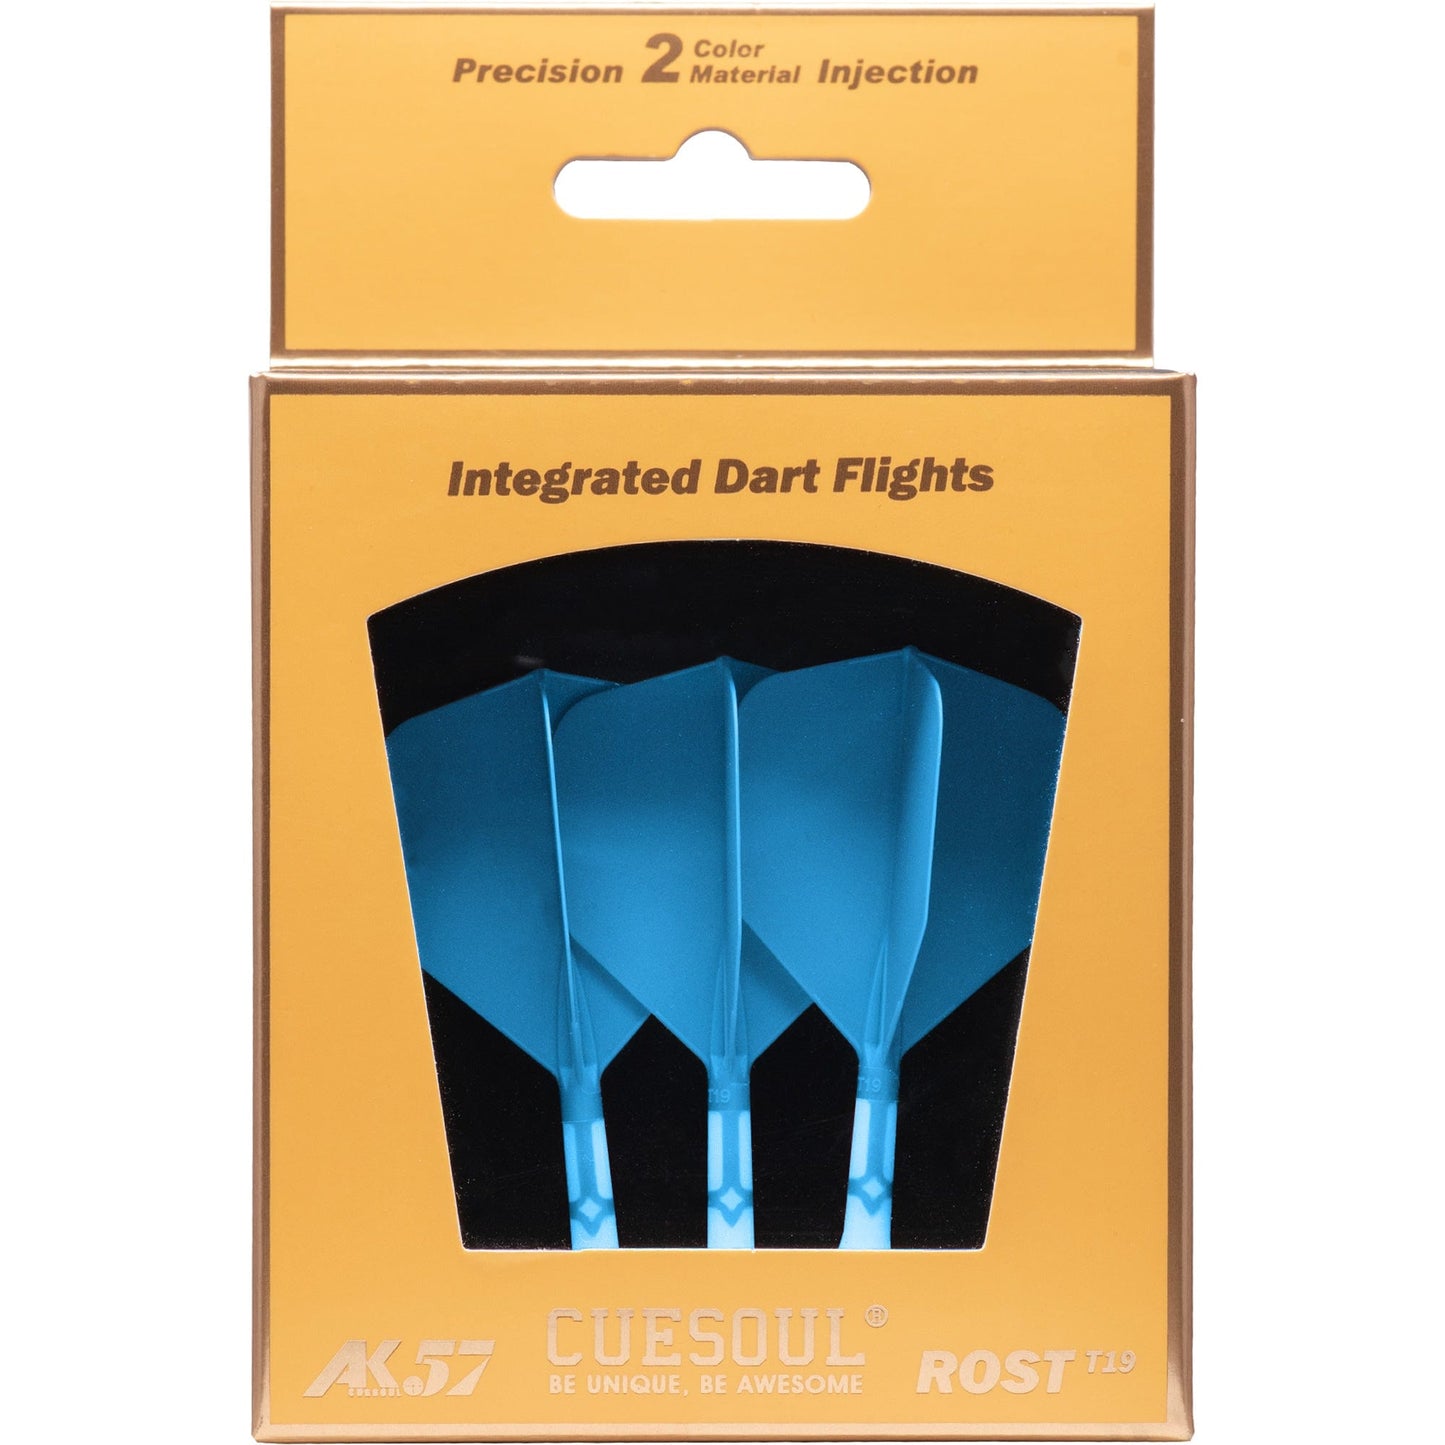 Cuesoul Rost T19 Integrated Dart Shaft and Flights - Big Wing - White with Blue Flight